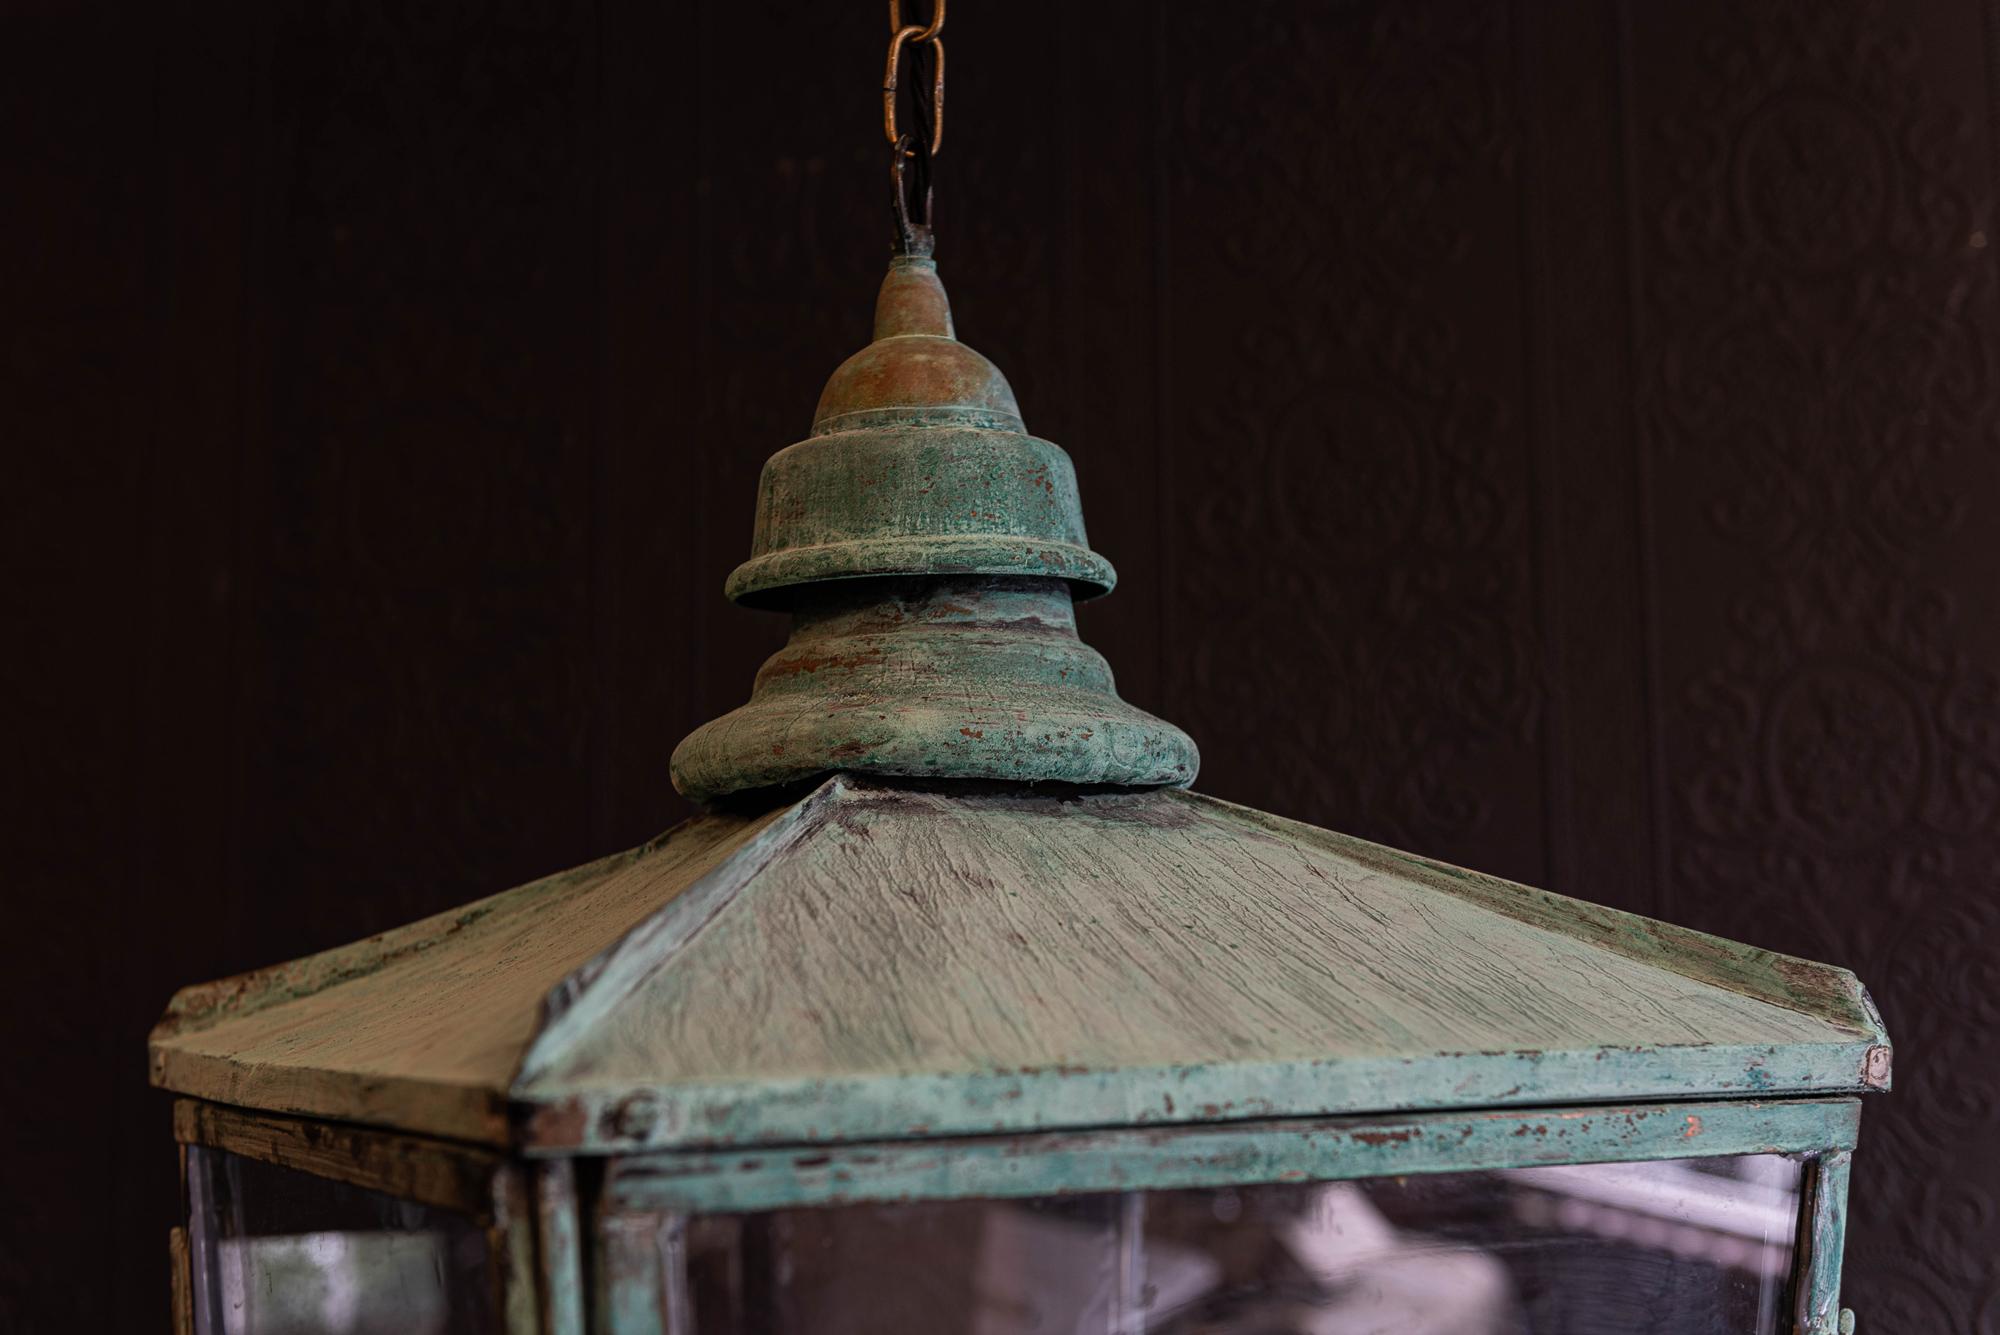 19th century English verdigris copper lantern,
circa 1890.

Two hinged doors

Comes with 1m of silk flex, 1m of heavy gauge antique brass chain and bronze ceiling hook

Re-glazed rewired and pat tested - ready to hang.

Measures: W 42 x H